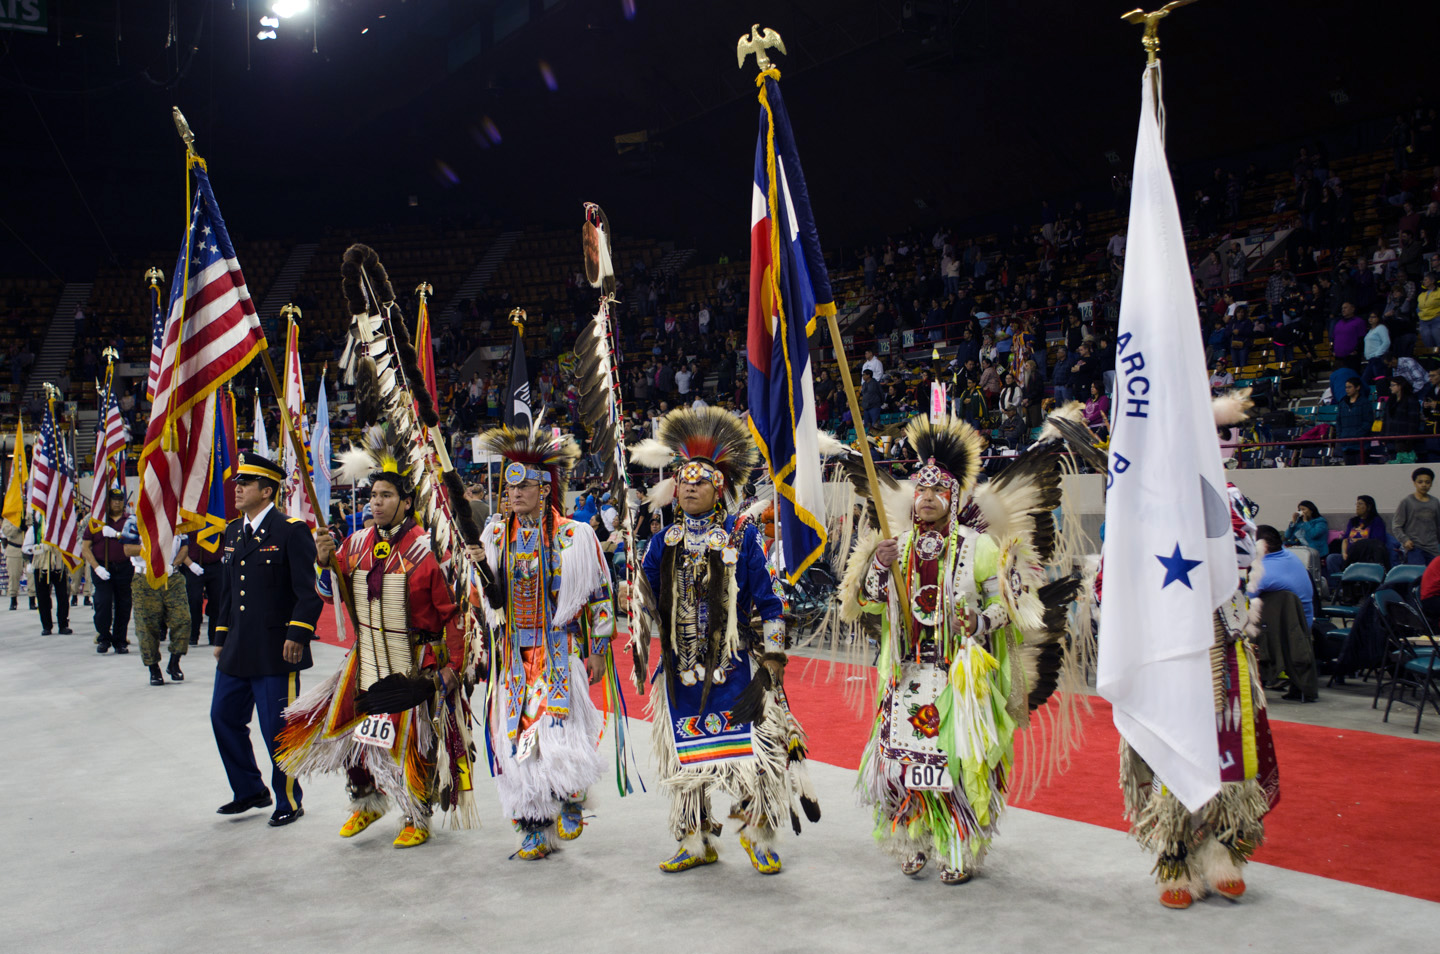 Head Dancers lead the way for the 39th annual Denver March Powwow.